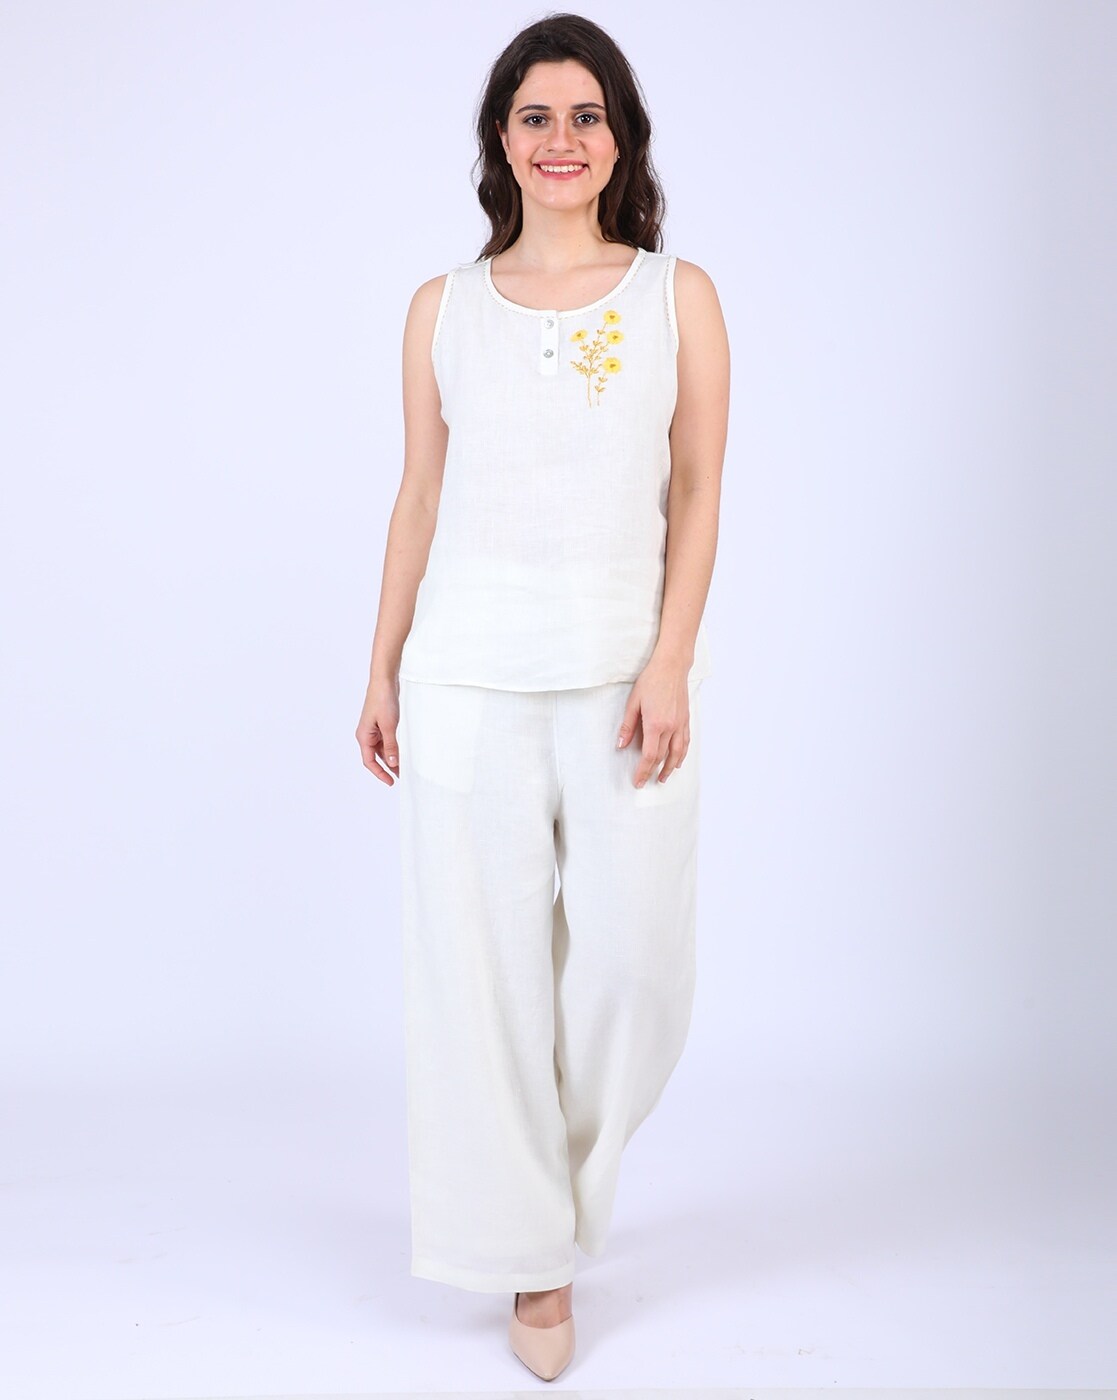 Buy Linen Bloom Solid Relaxed Fit Ankle Length Pants, Silver Color Women